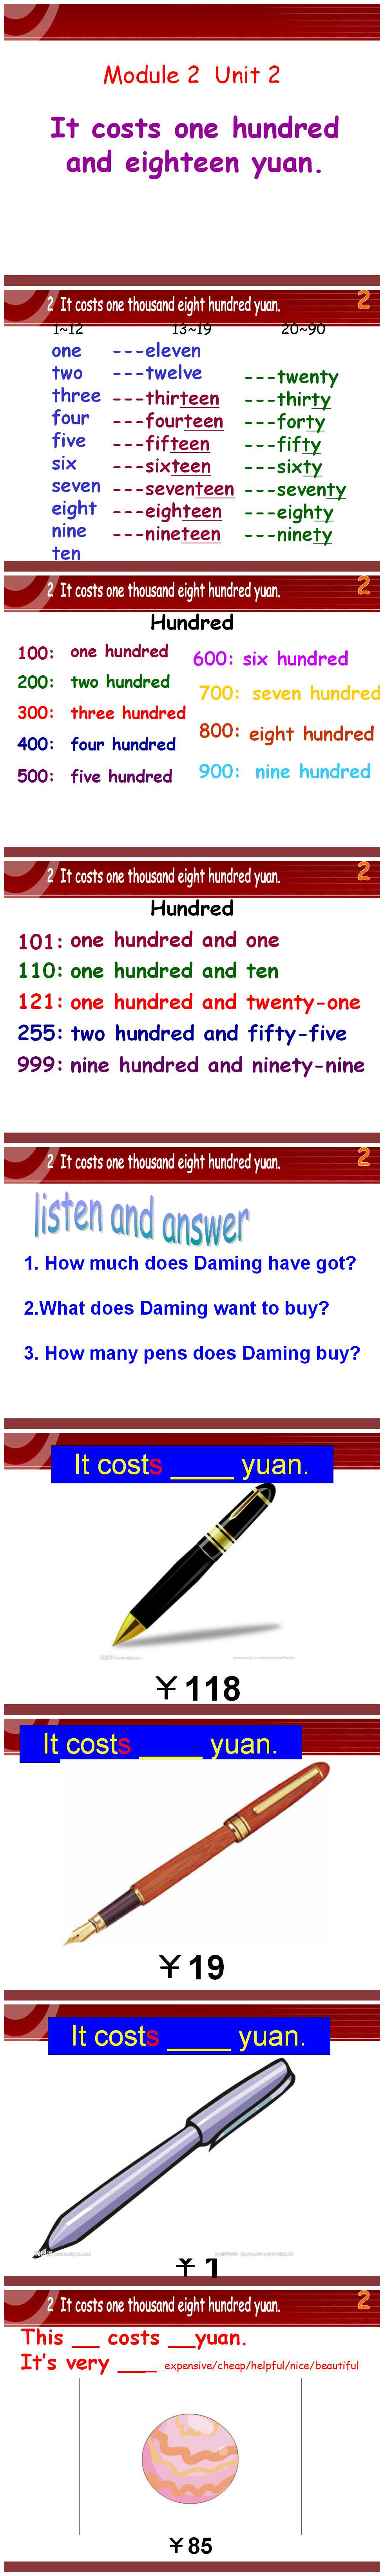 《It costs one thousand eight hundred yuan》PPT课件5PPT课件下载